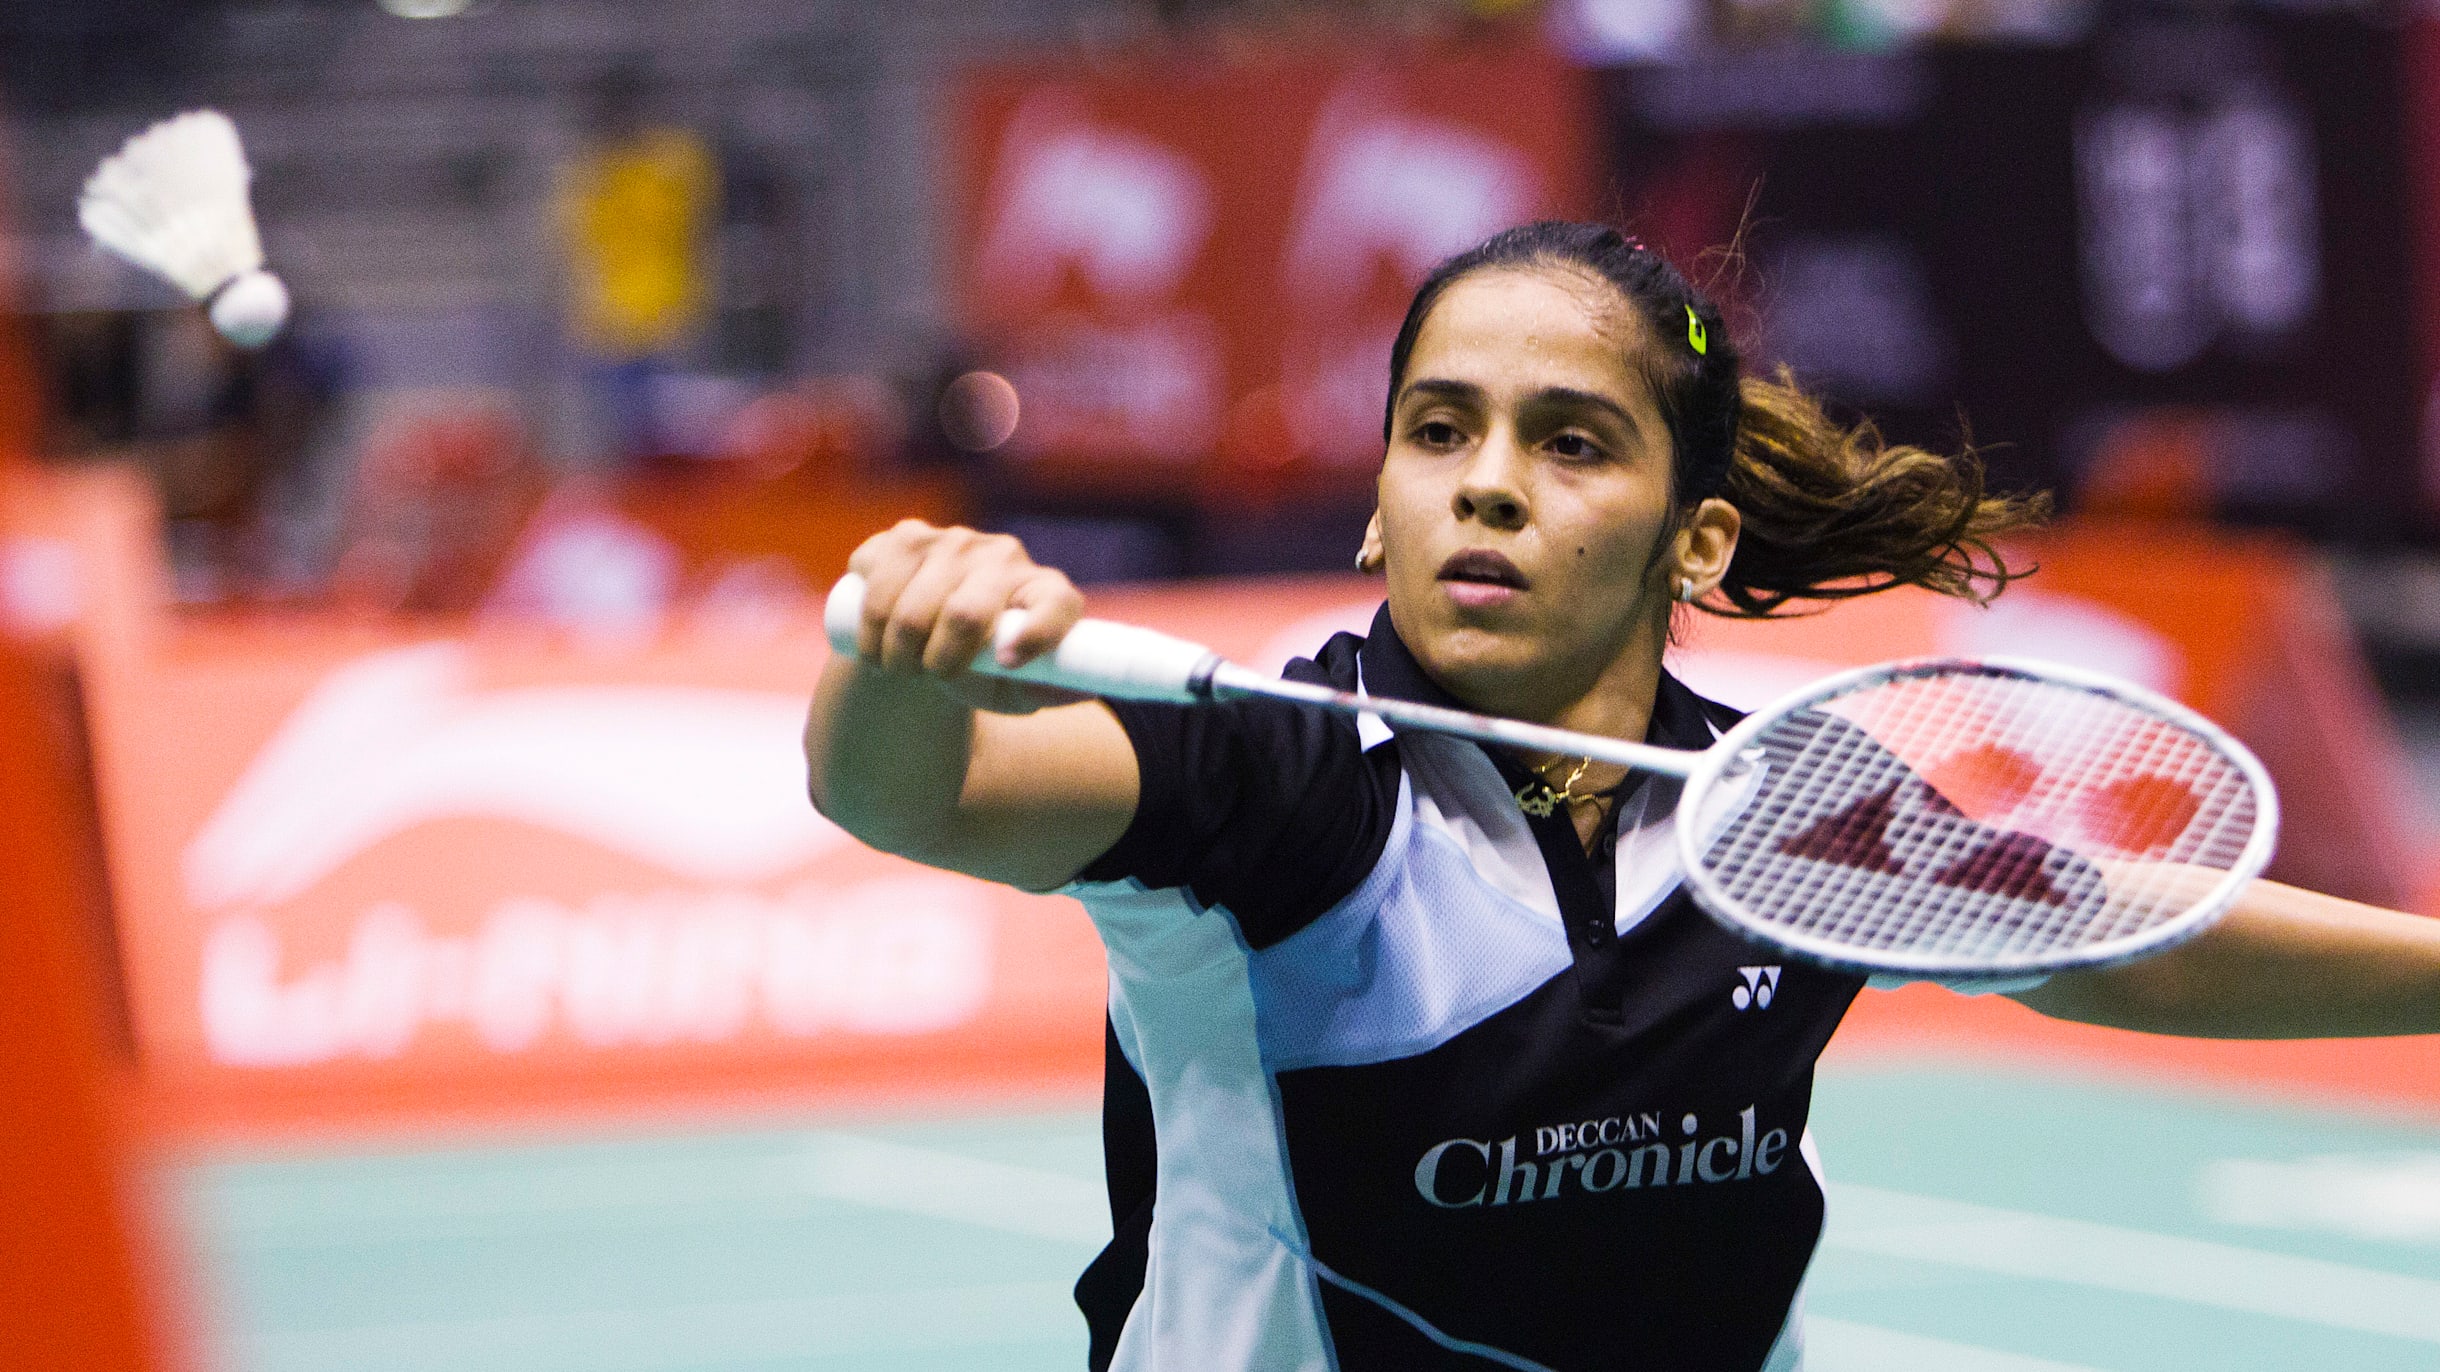 Taipei Open badminton 2022 Watch live streaming and telecast in India